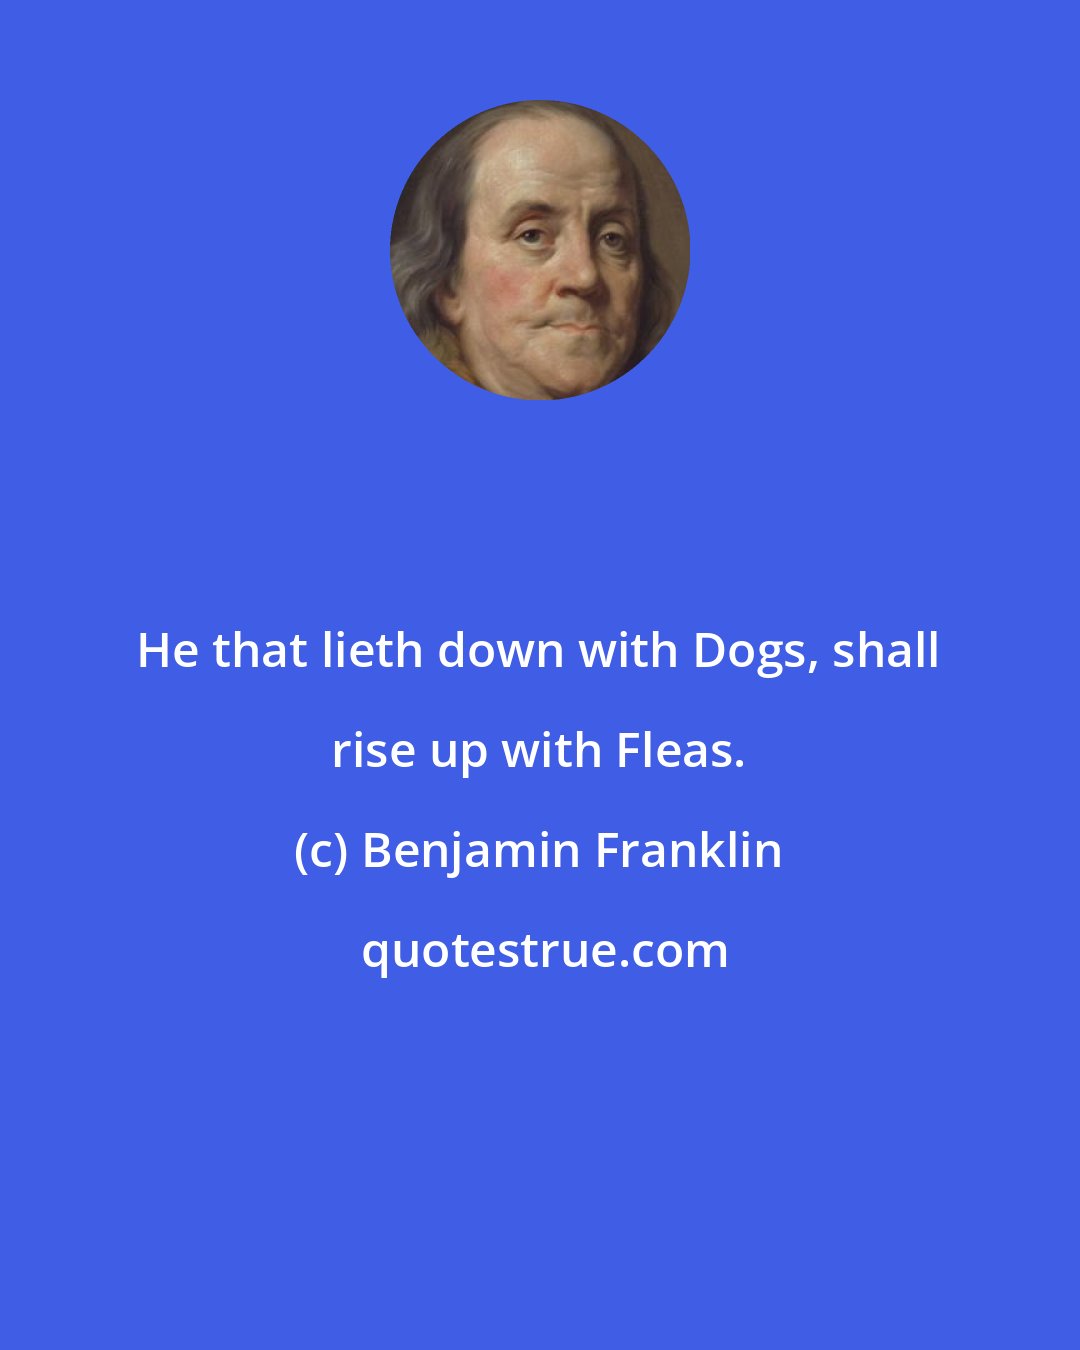 Benjamin Franklin: He that lieth down with Dogs, shall rise up with Fleas.